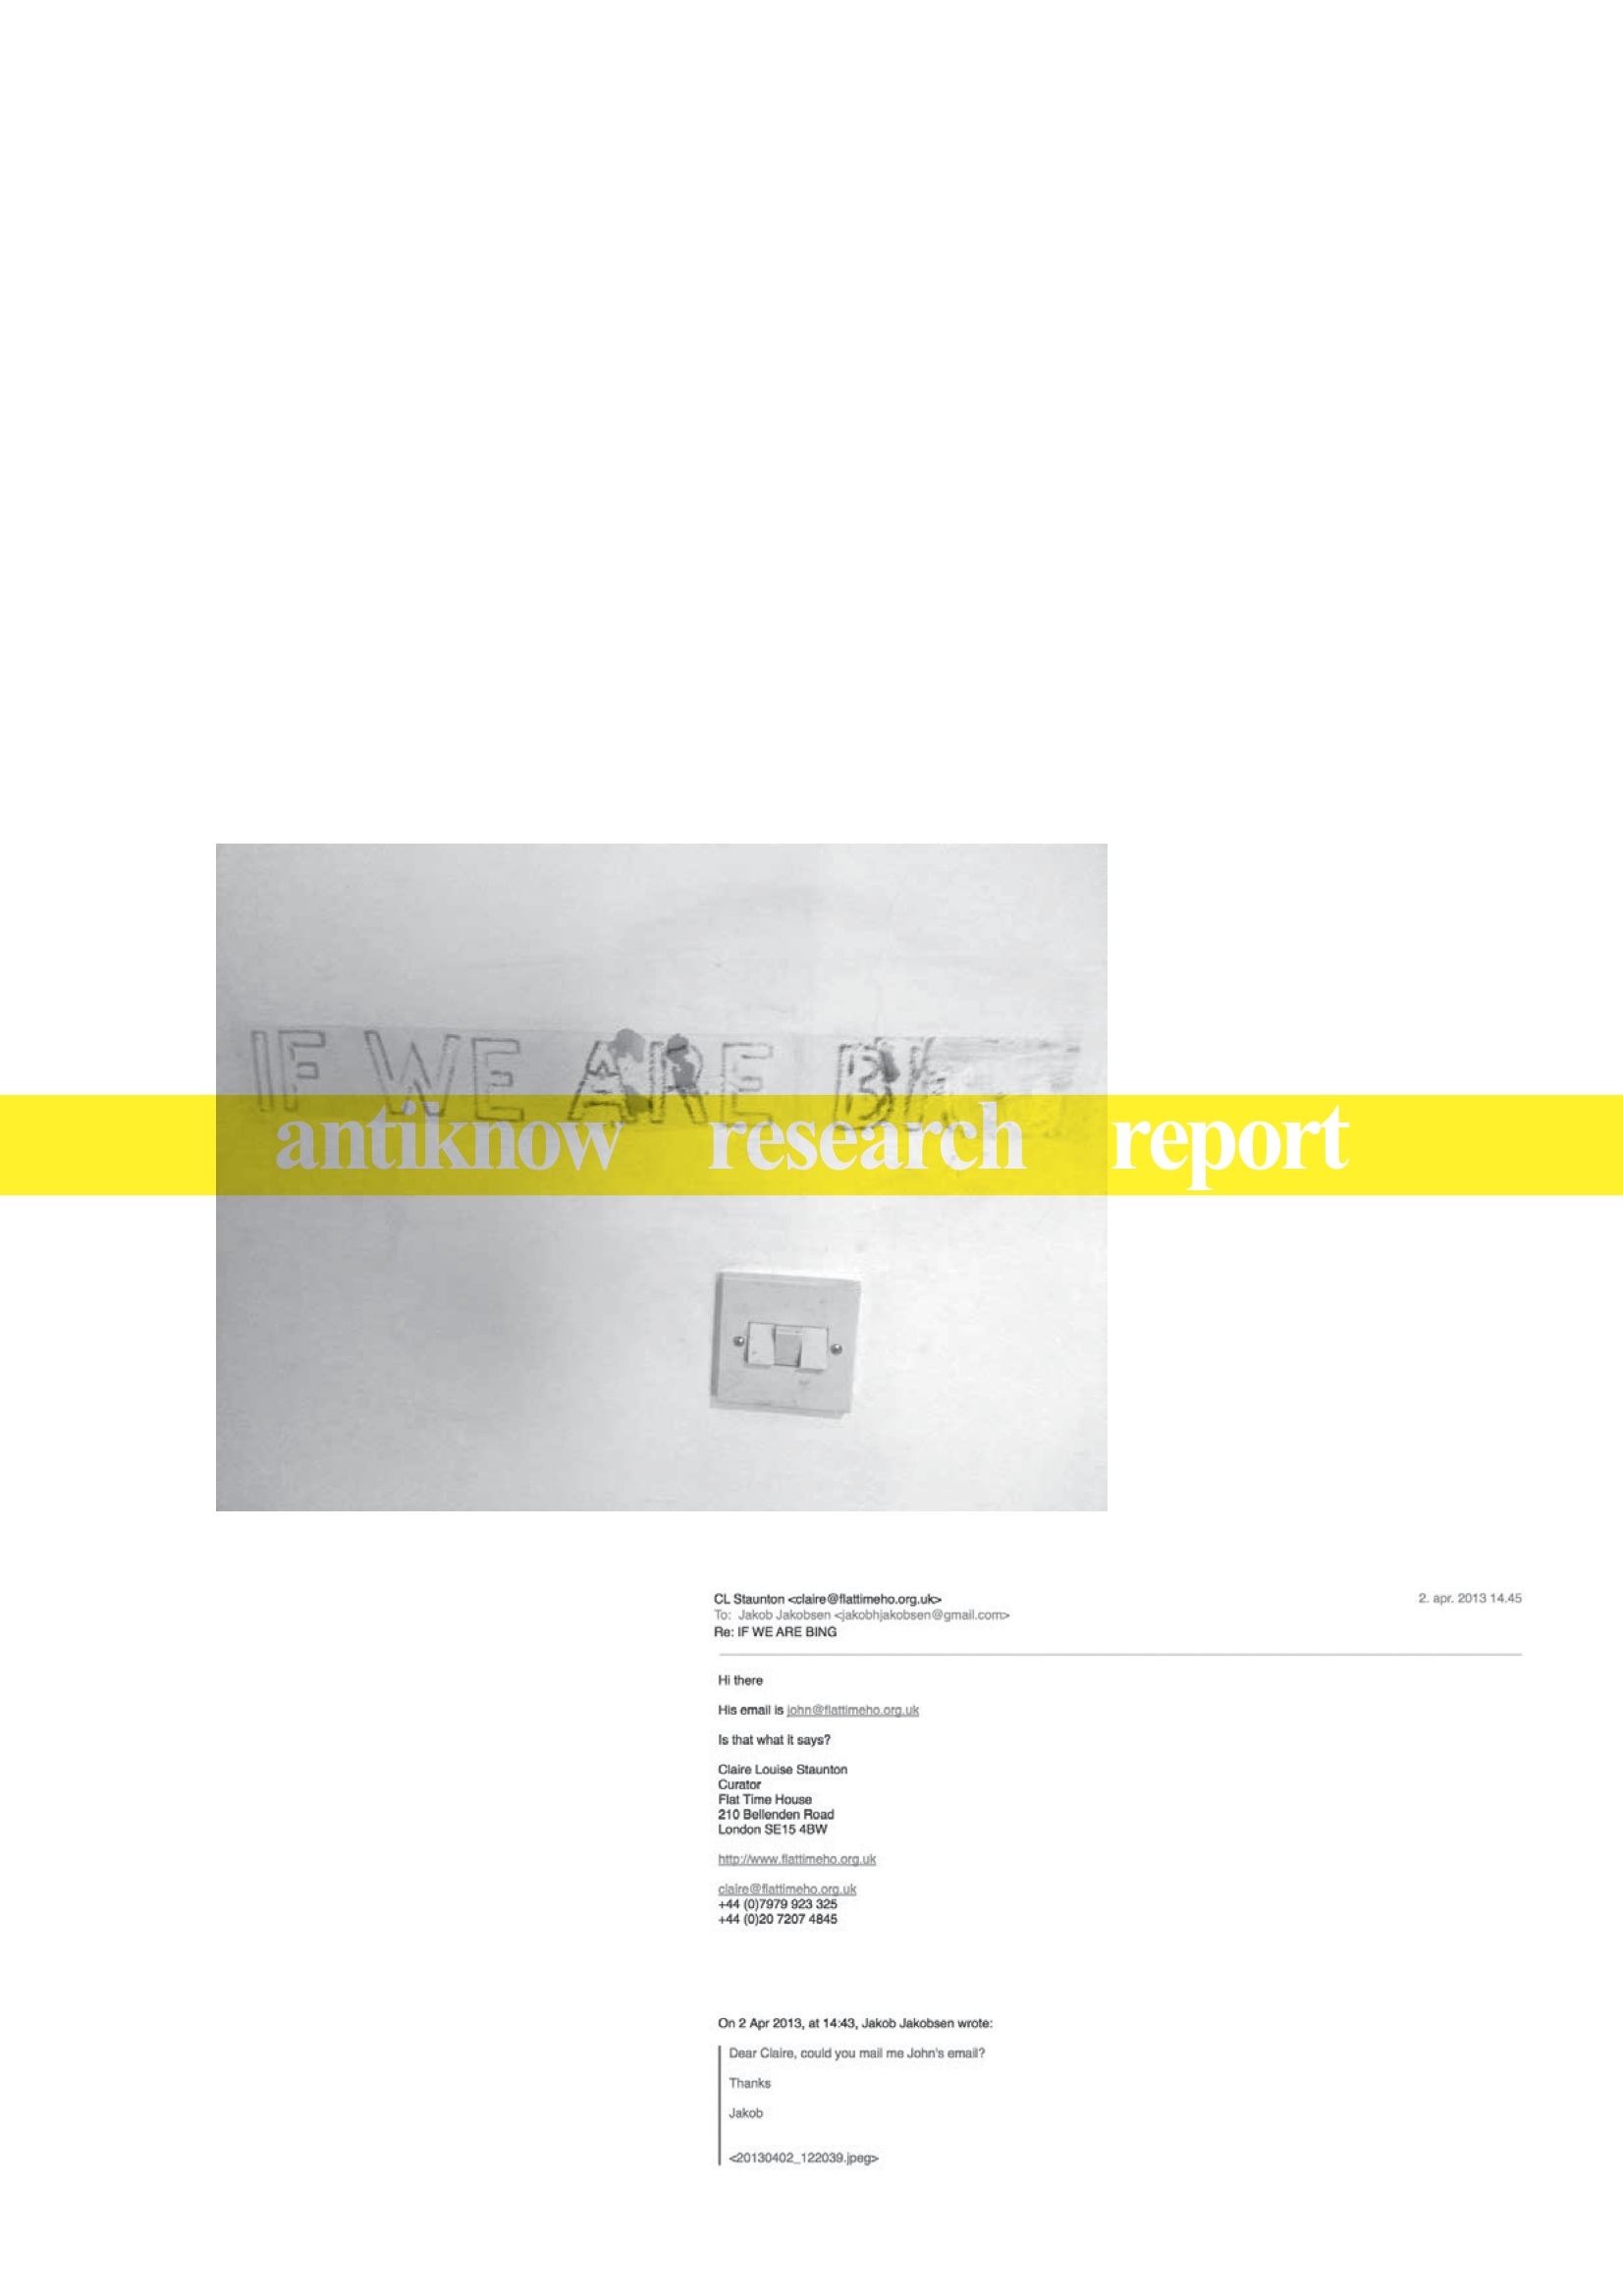  (ANTIKNOW RESEARCH REPORT 3)